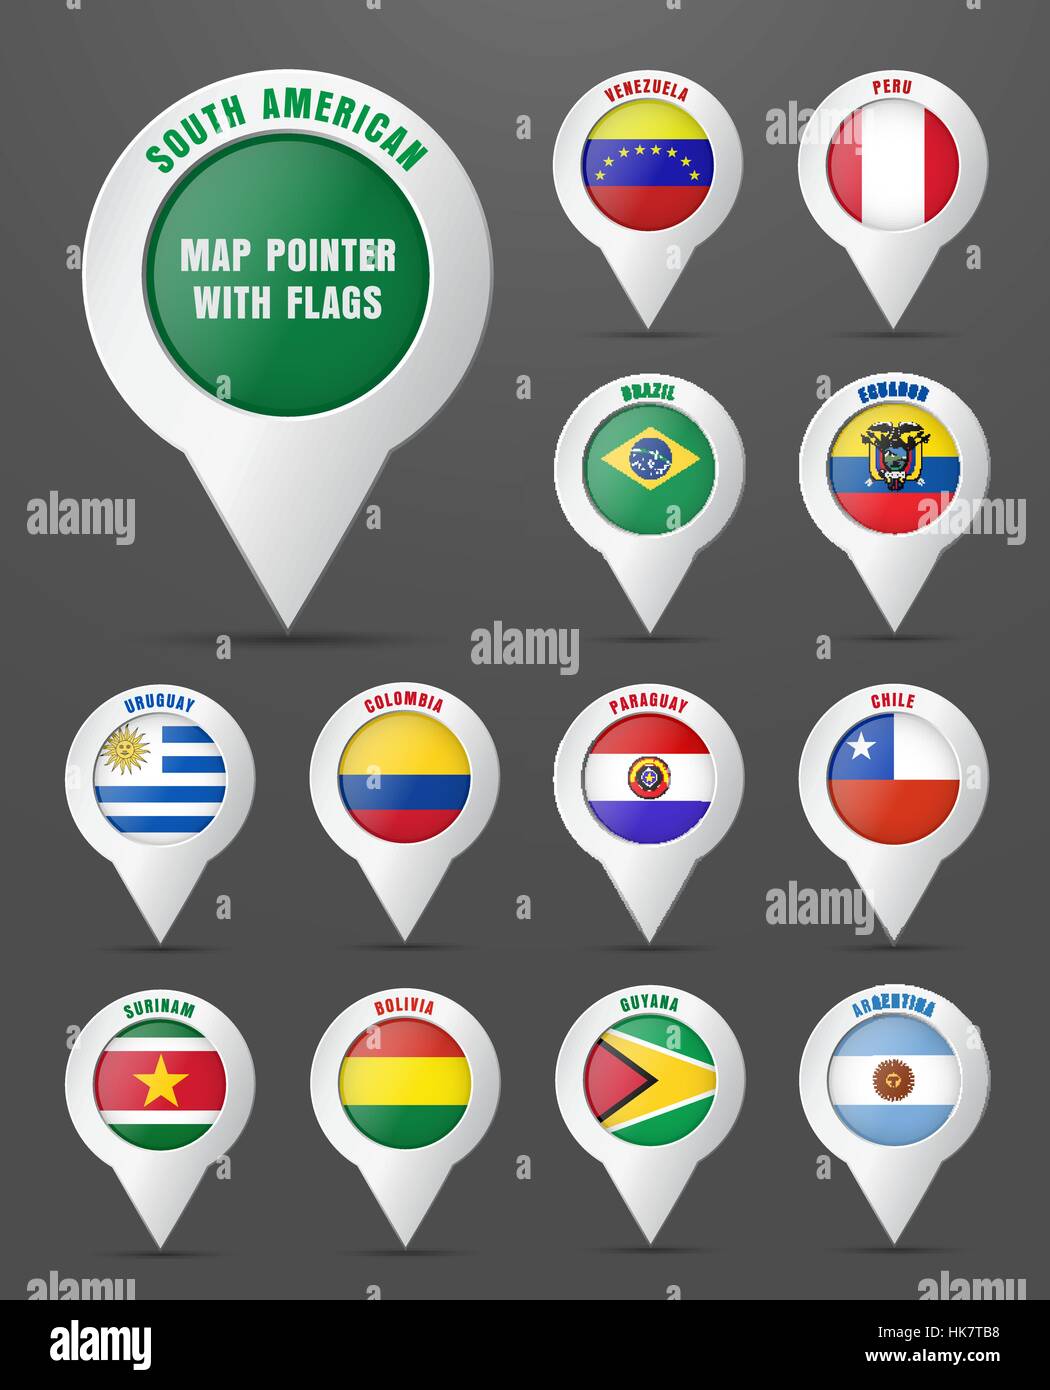 Set the pointer to the map with the flag of South American countries, and their names. Vector illustration Stock Vector